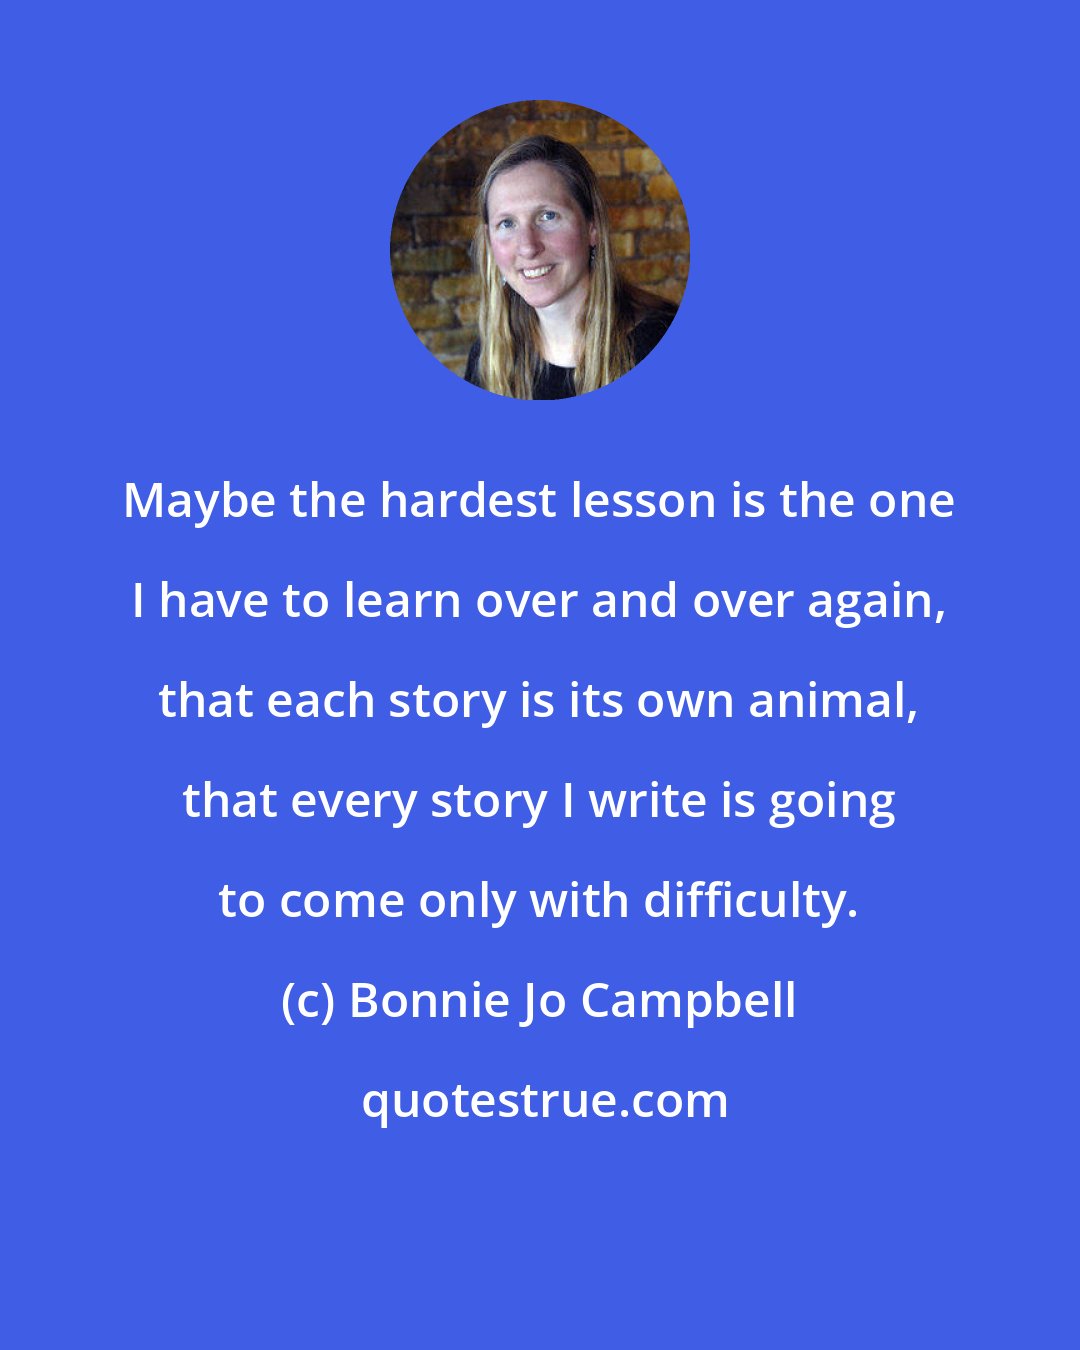 Bonnie Jo Campbell: Maybe the hardest lesson is the one I have to learn over and over again, that each story is its own animal, that every story I write is going to come only with difficulty.